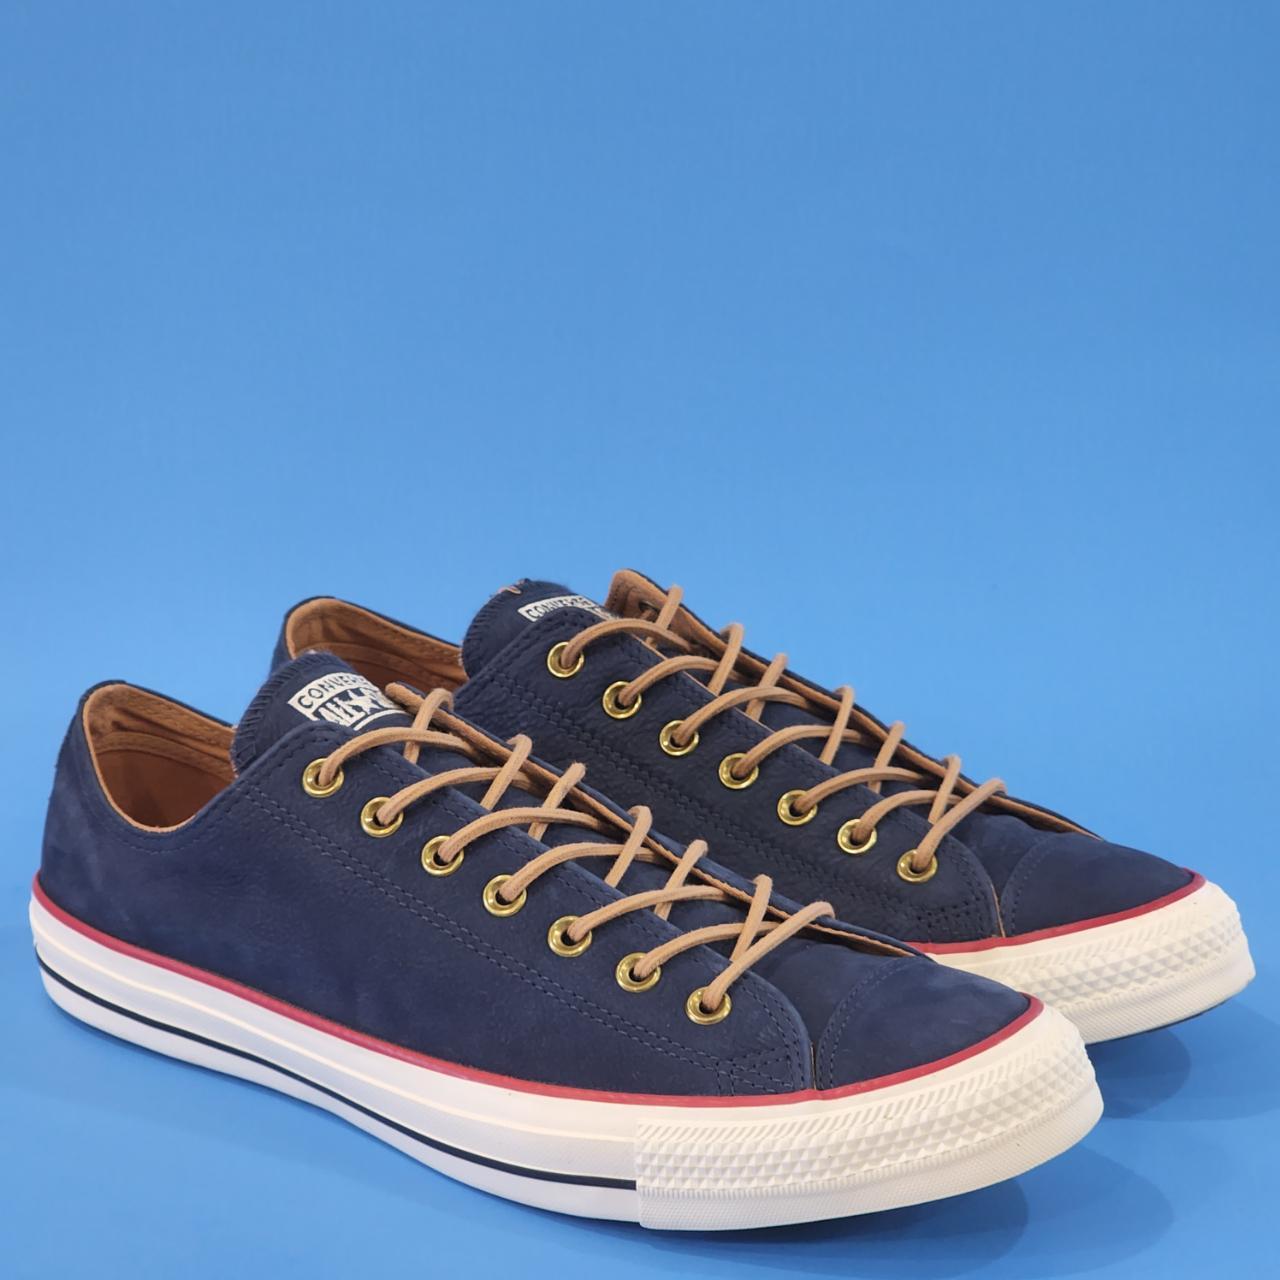 Converse Men's Blue and Navy Trainers | Depop